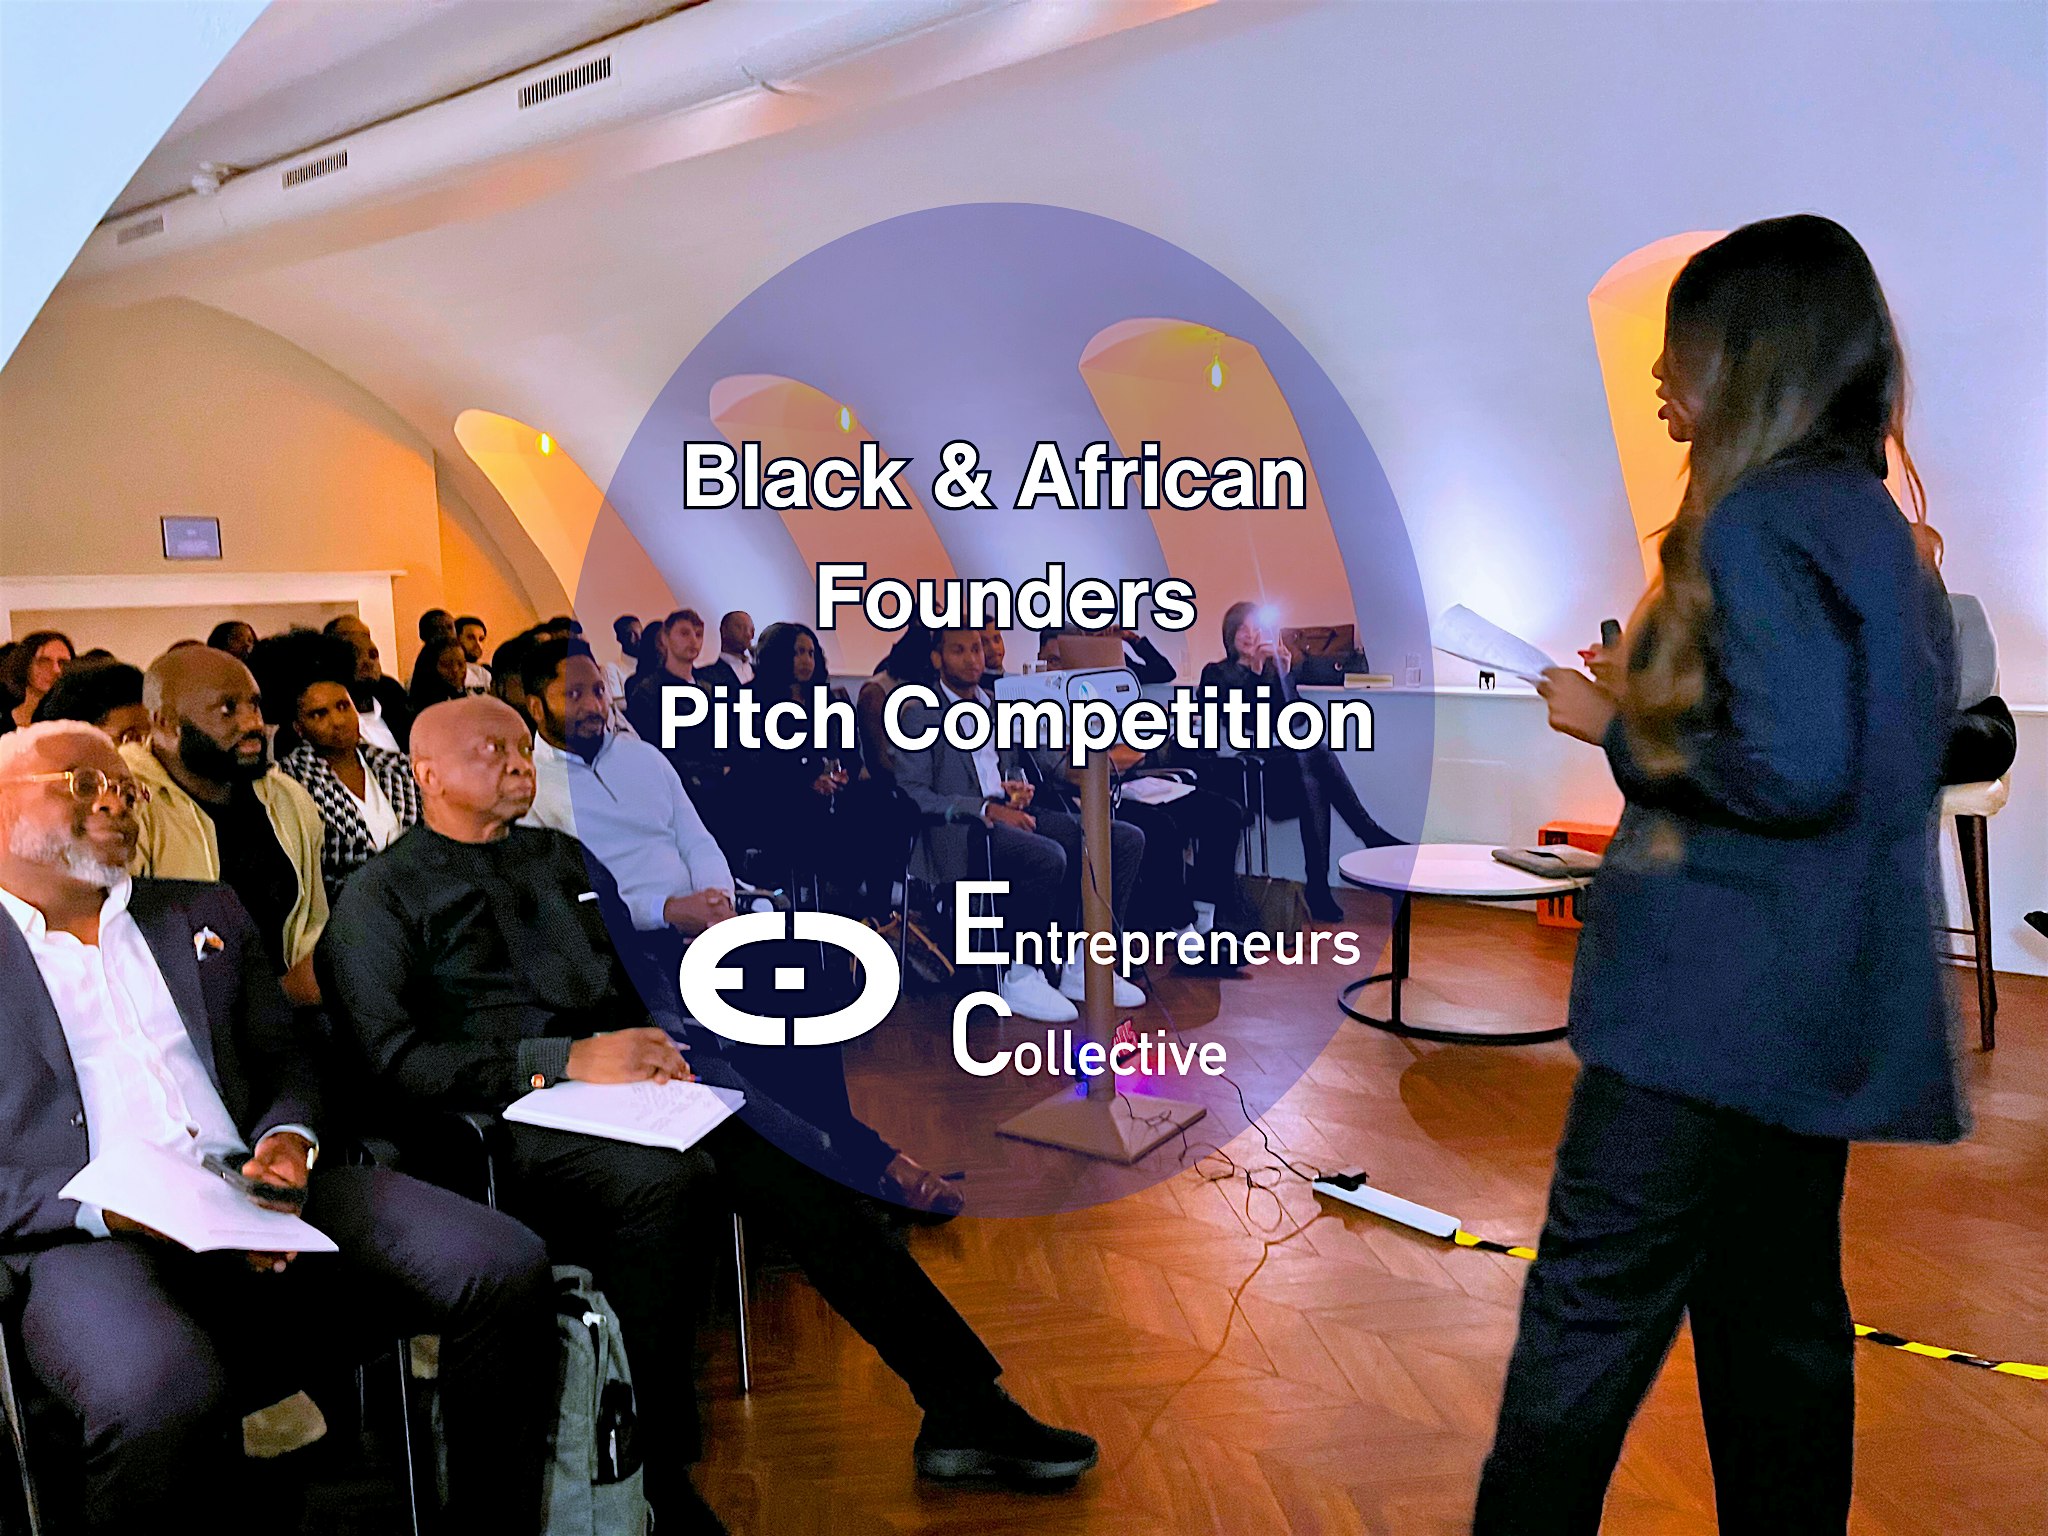 Black & African founder StartUp Pitch Competition with VC & Angel Investors